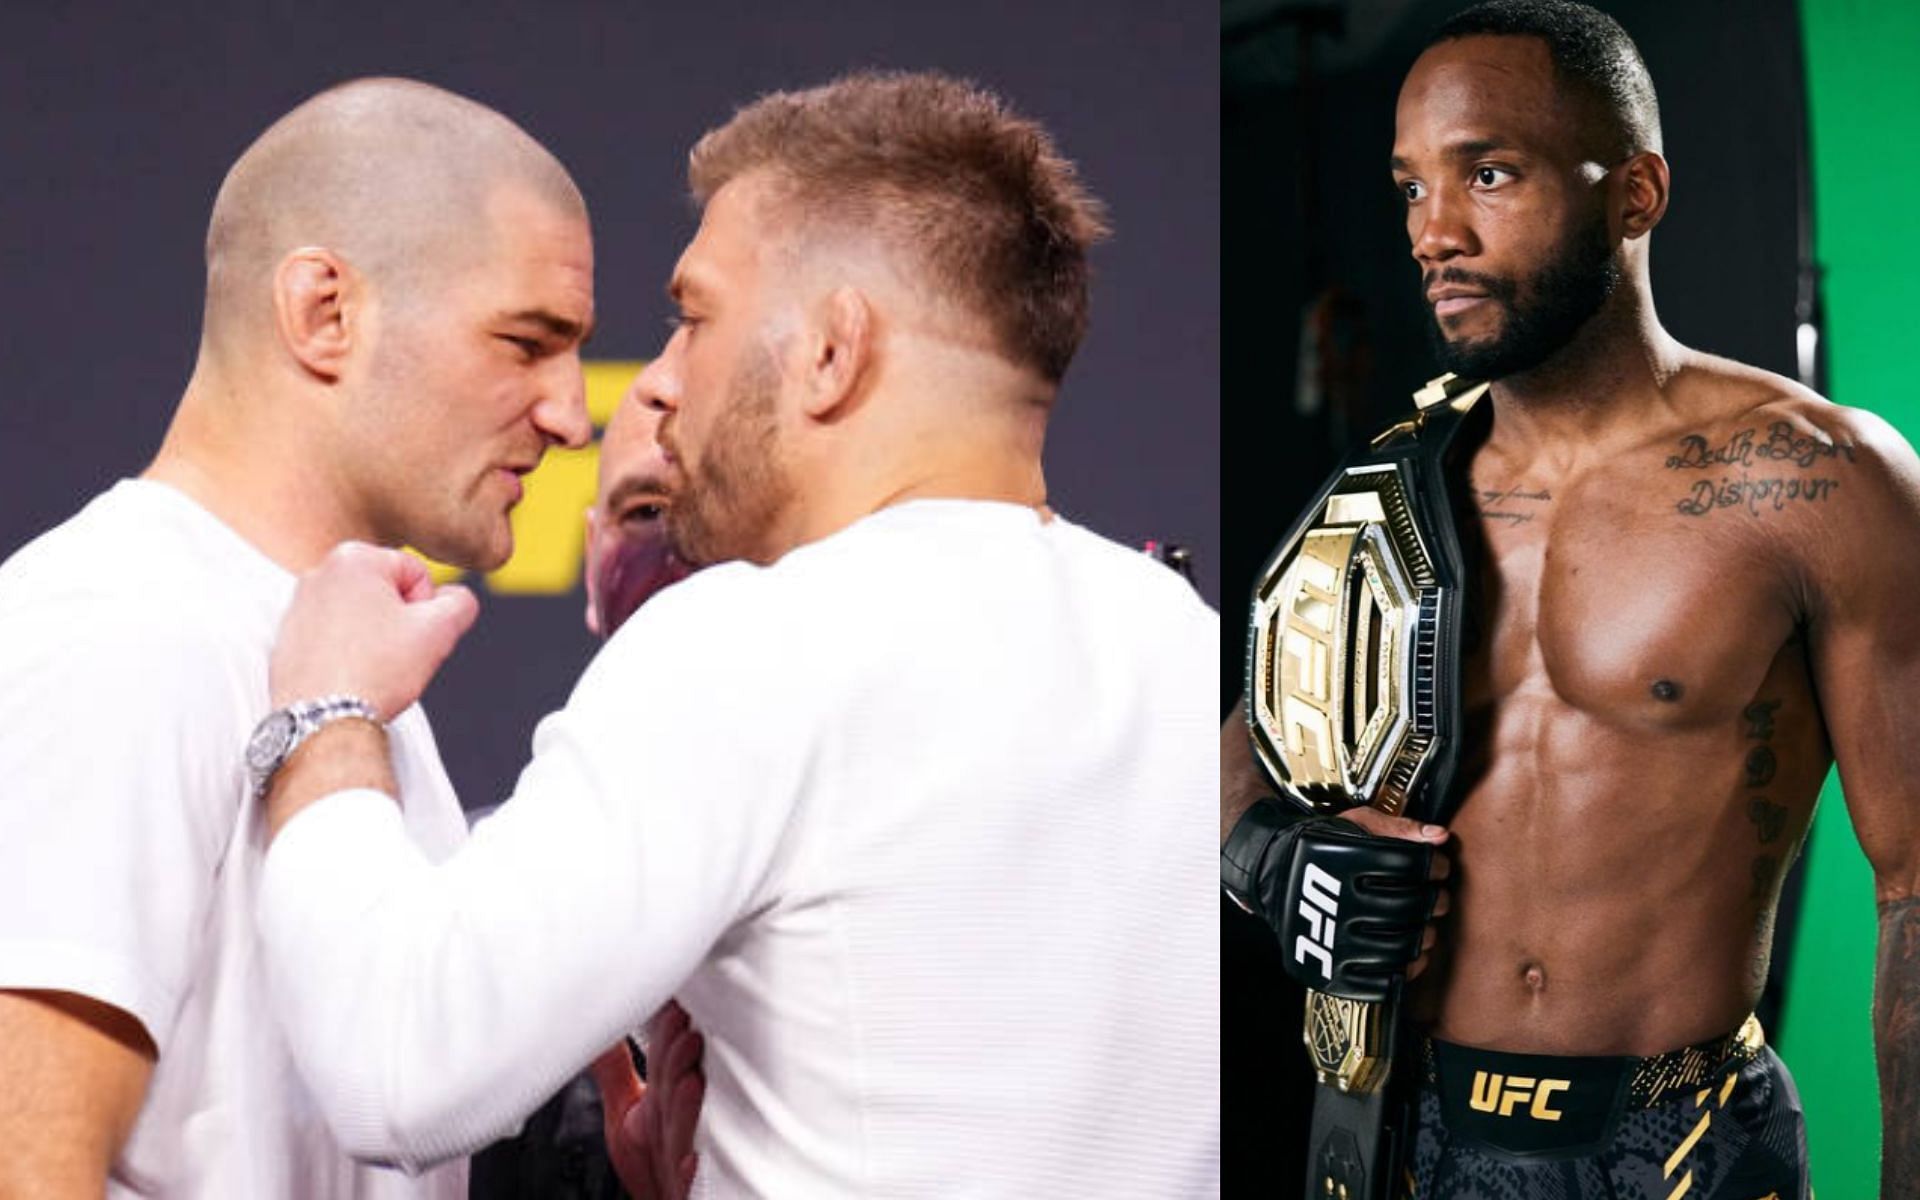 Sean Strickland (left) must remain emotionless against Dricus du Plessis (middle), says coach, who points to Leon Edwards (right) performance against Covington at UFC 296 [Images Courtesy: @GettyImages and @leonedwardsmma on Instagram]